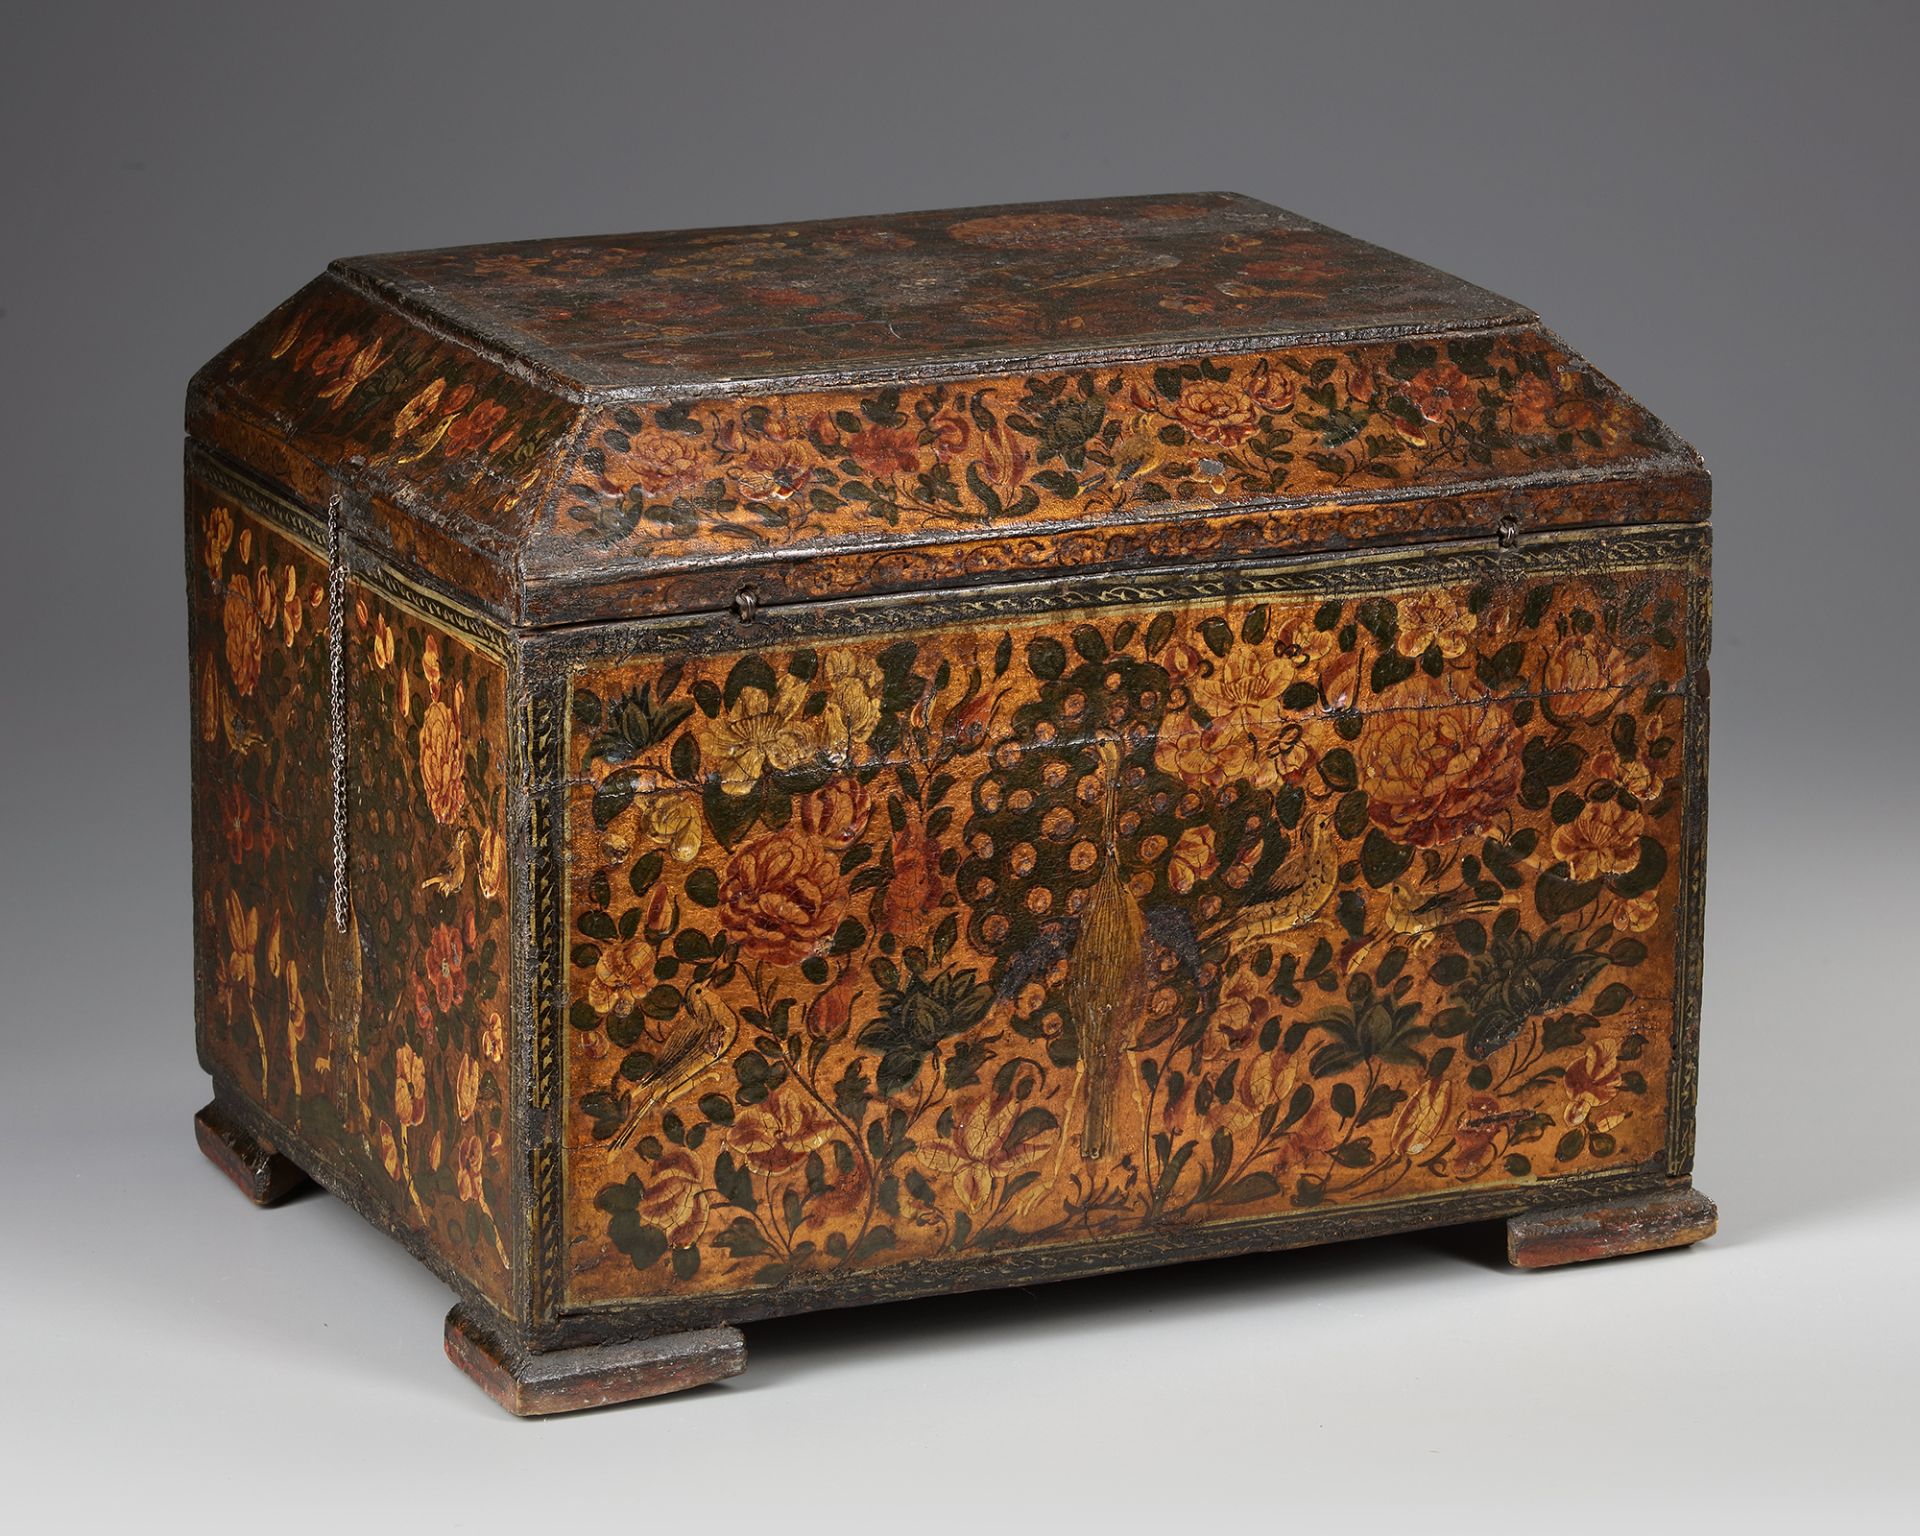 A PERSIAN WOODEN CHEST WITH DRAWERS - Image 5 of 5